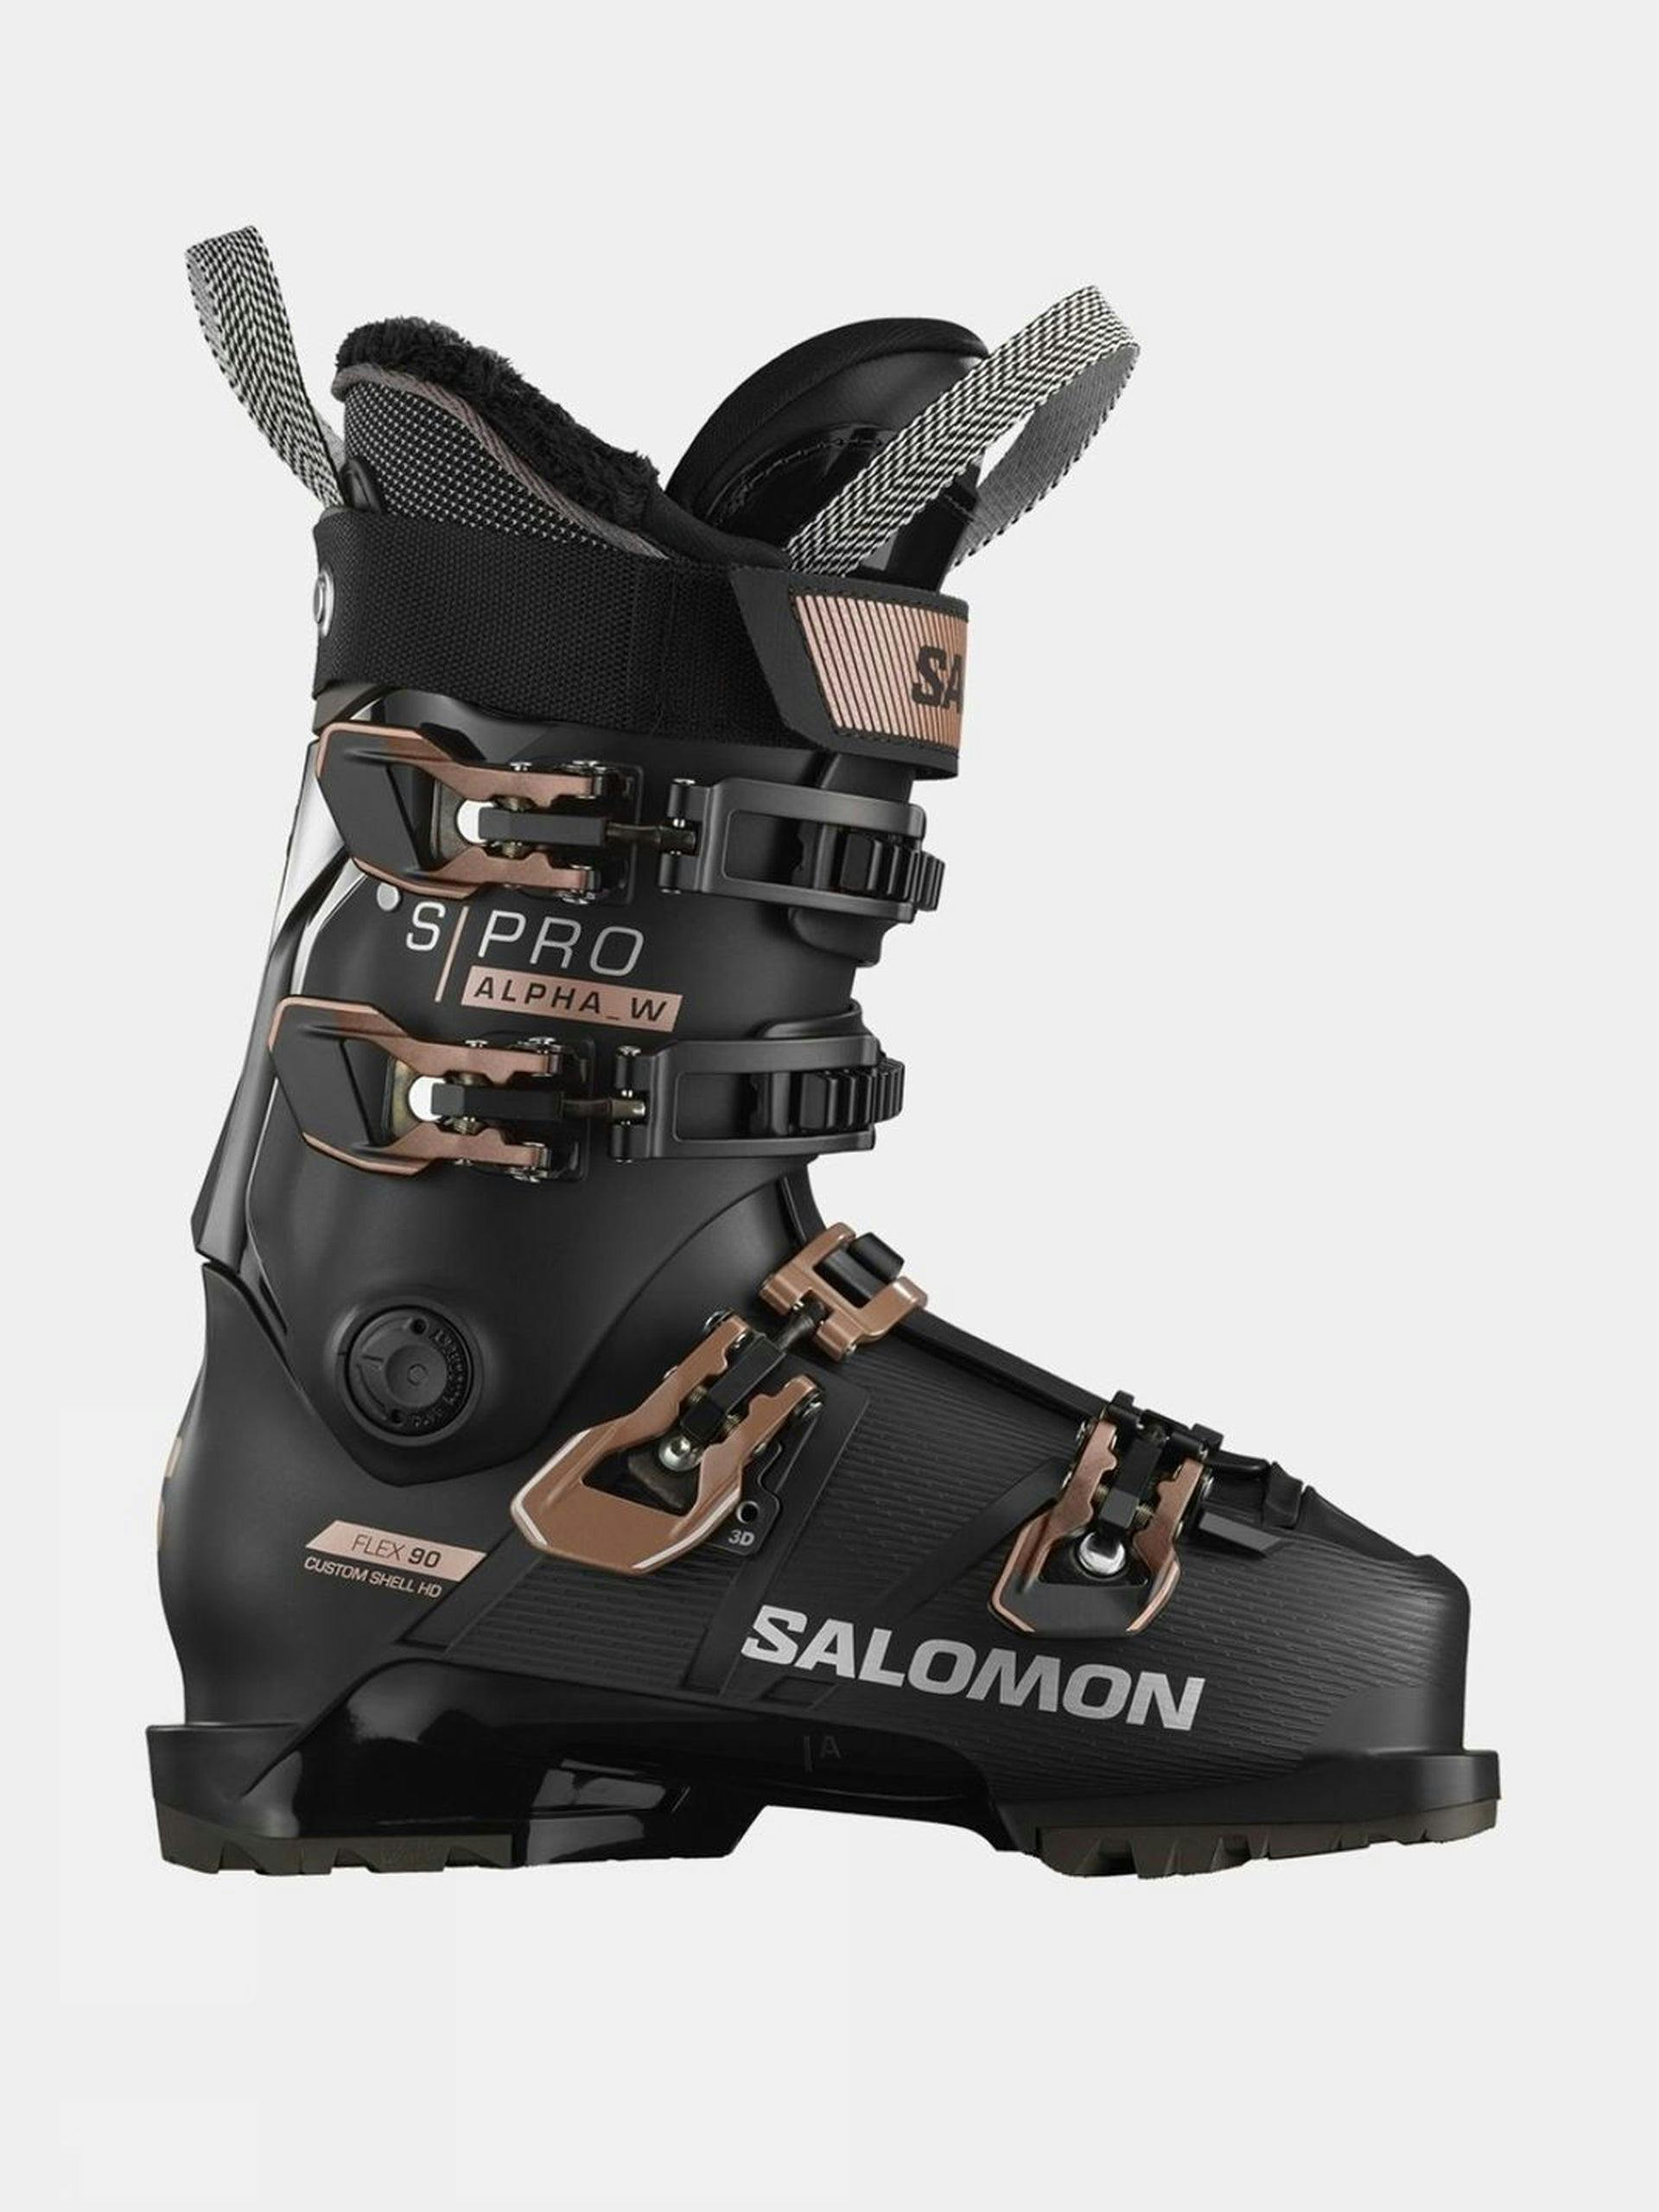 Black and rose gold ski boots